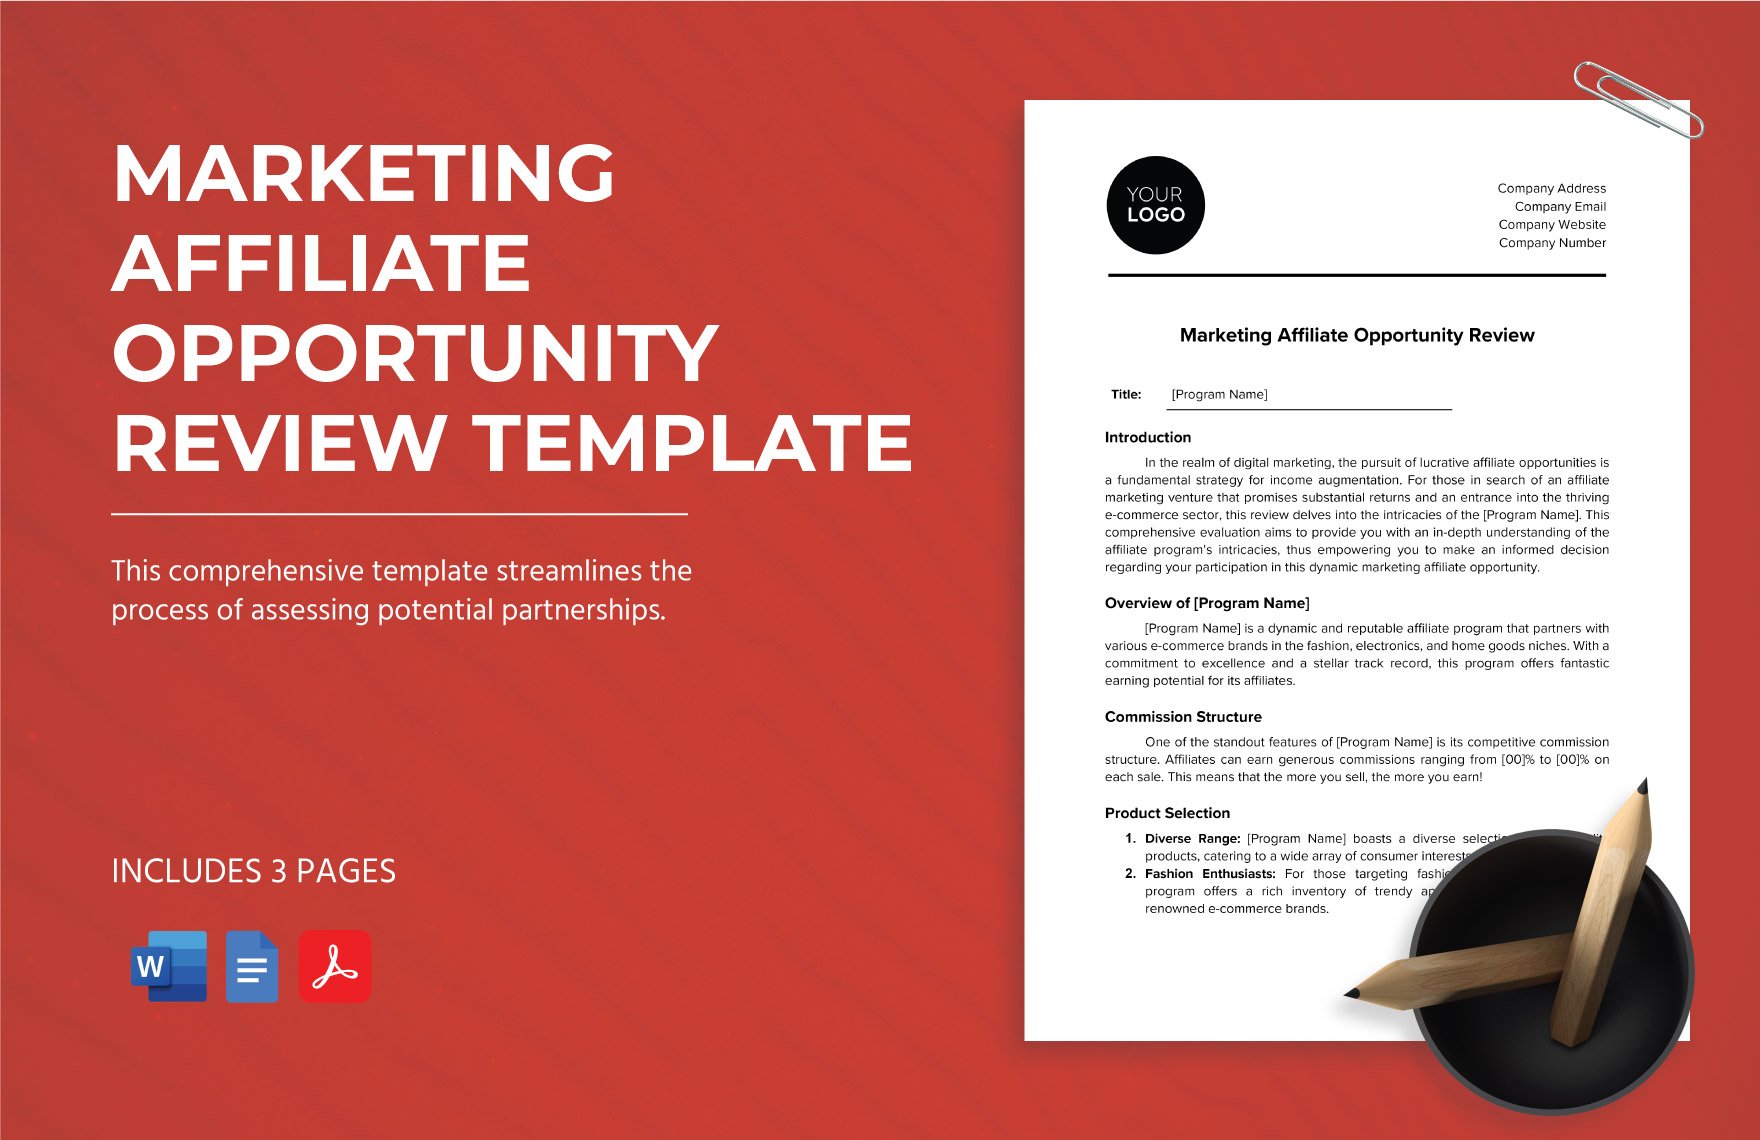 Marketing Affiliate Opportunity Review Template